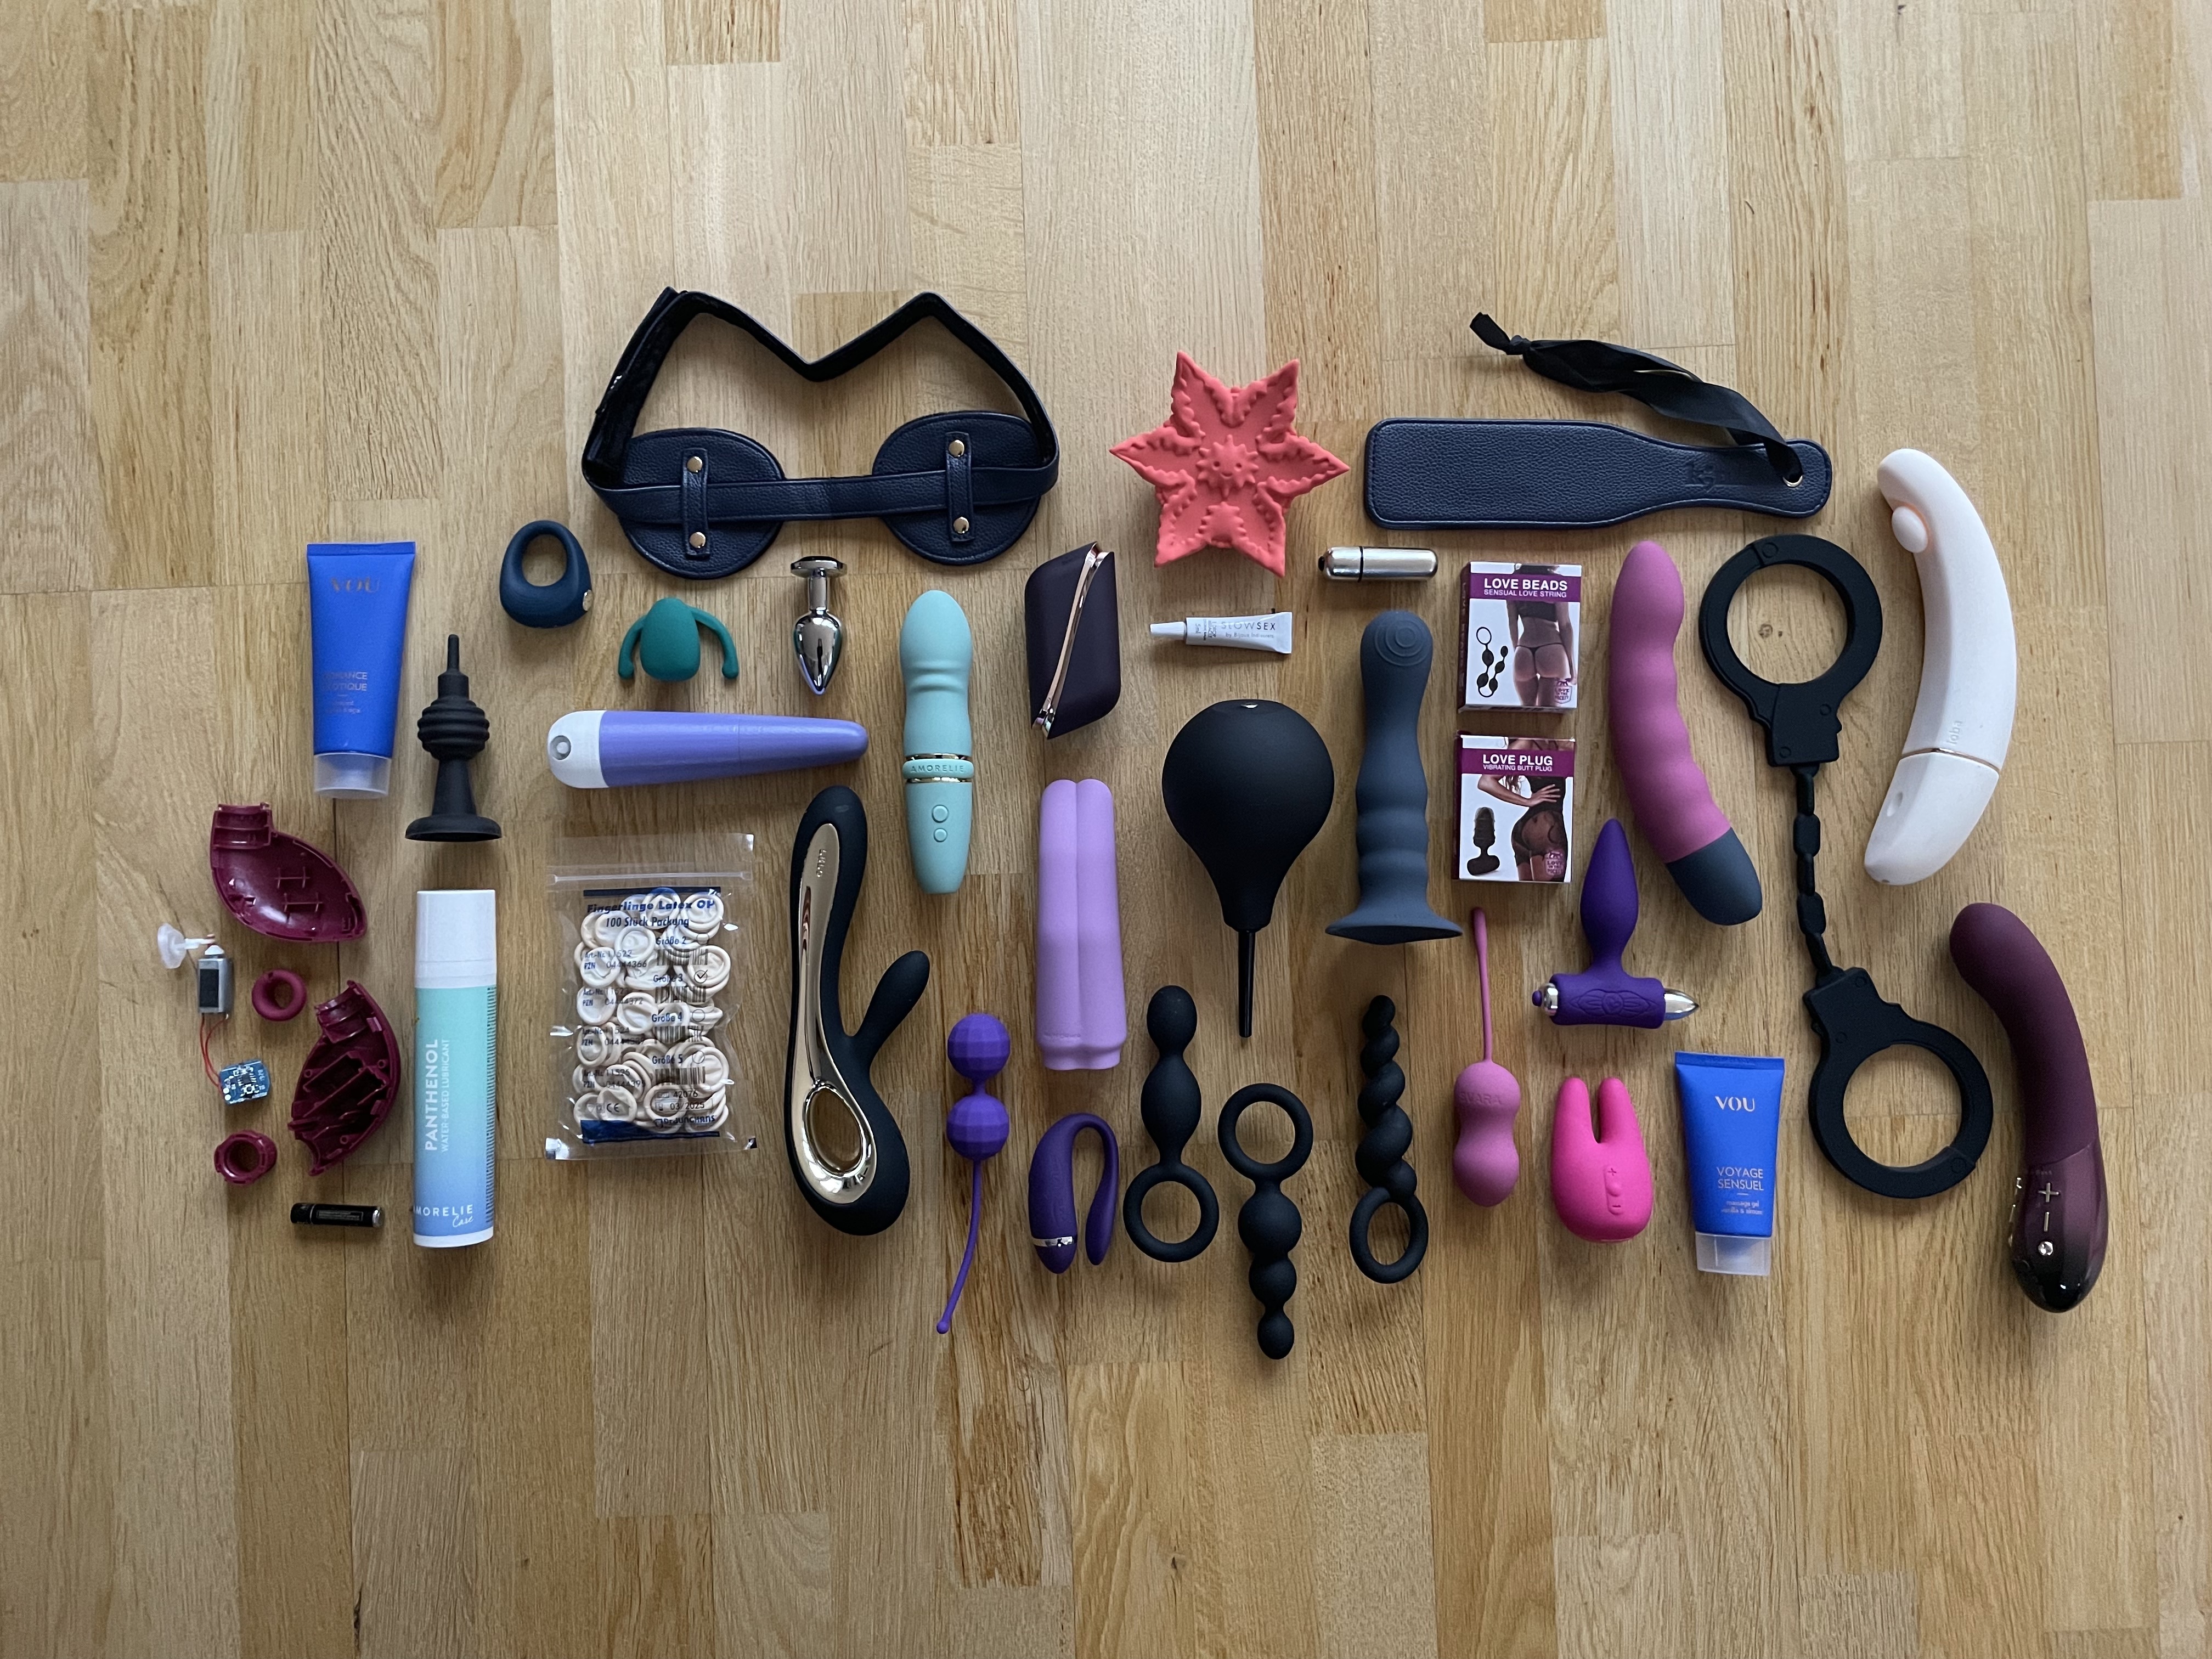 My Sex Toy Collection as of January 2022 Carolyn Stransky picture